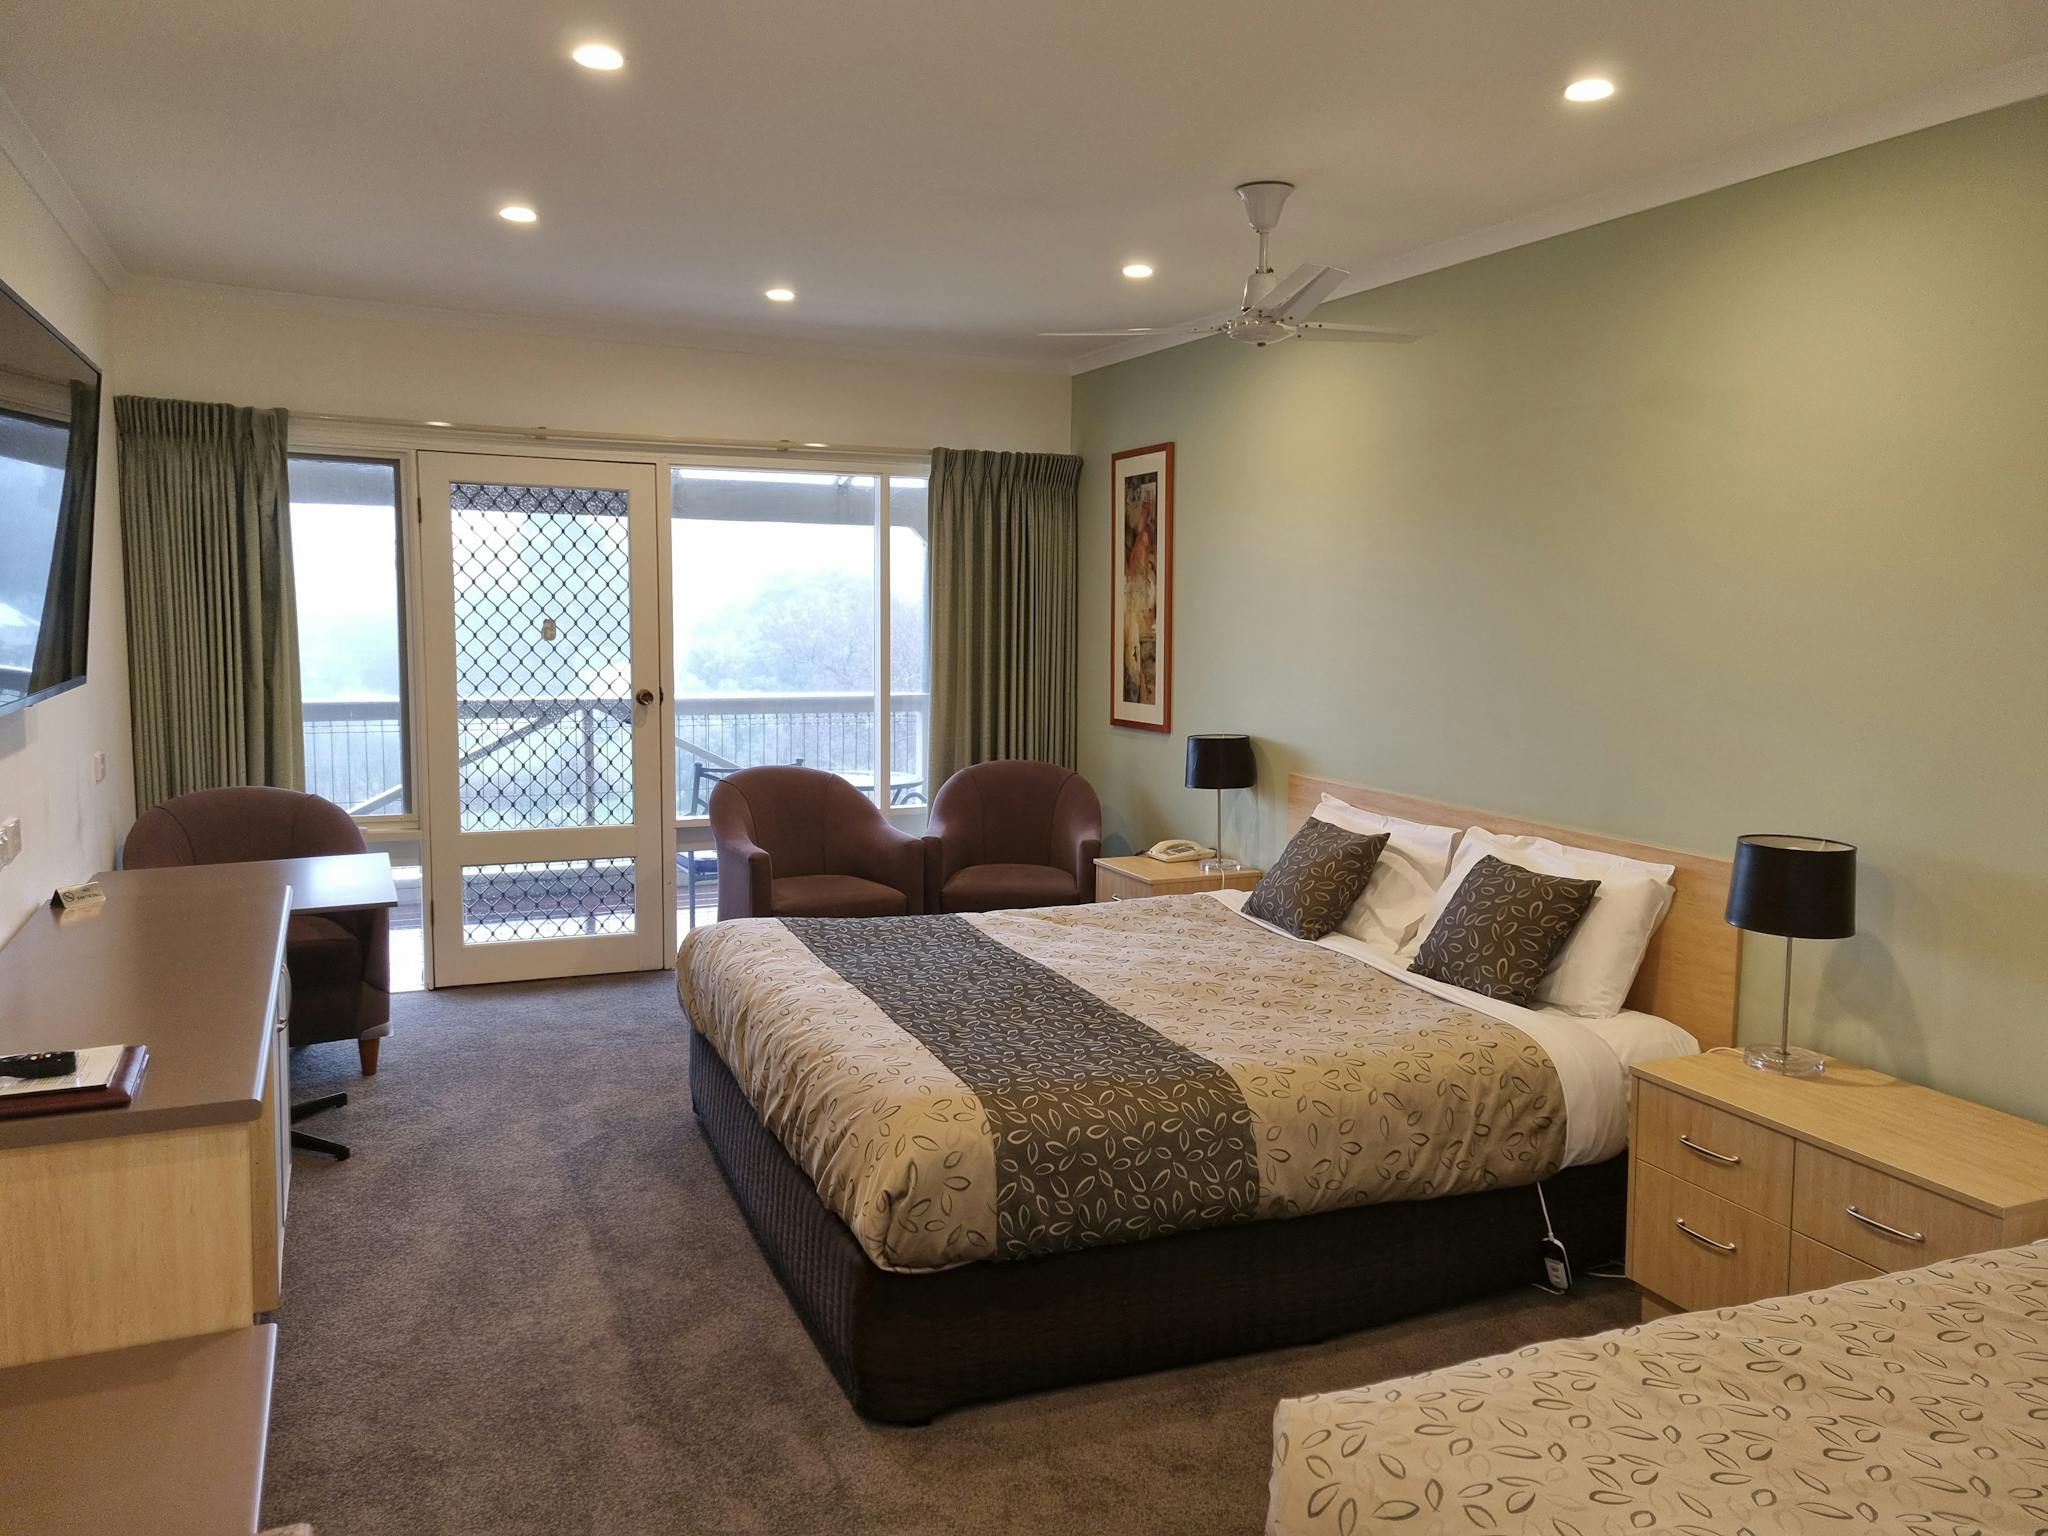 Executive King Twin Suites overlooking towards gorge and township